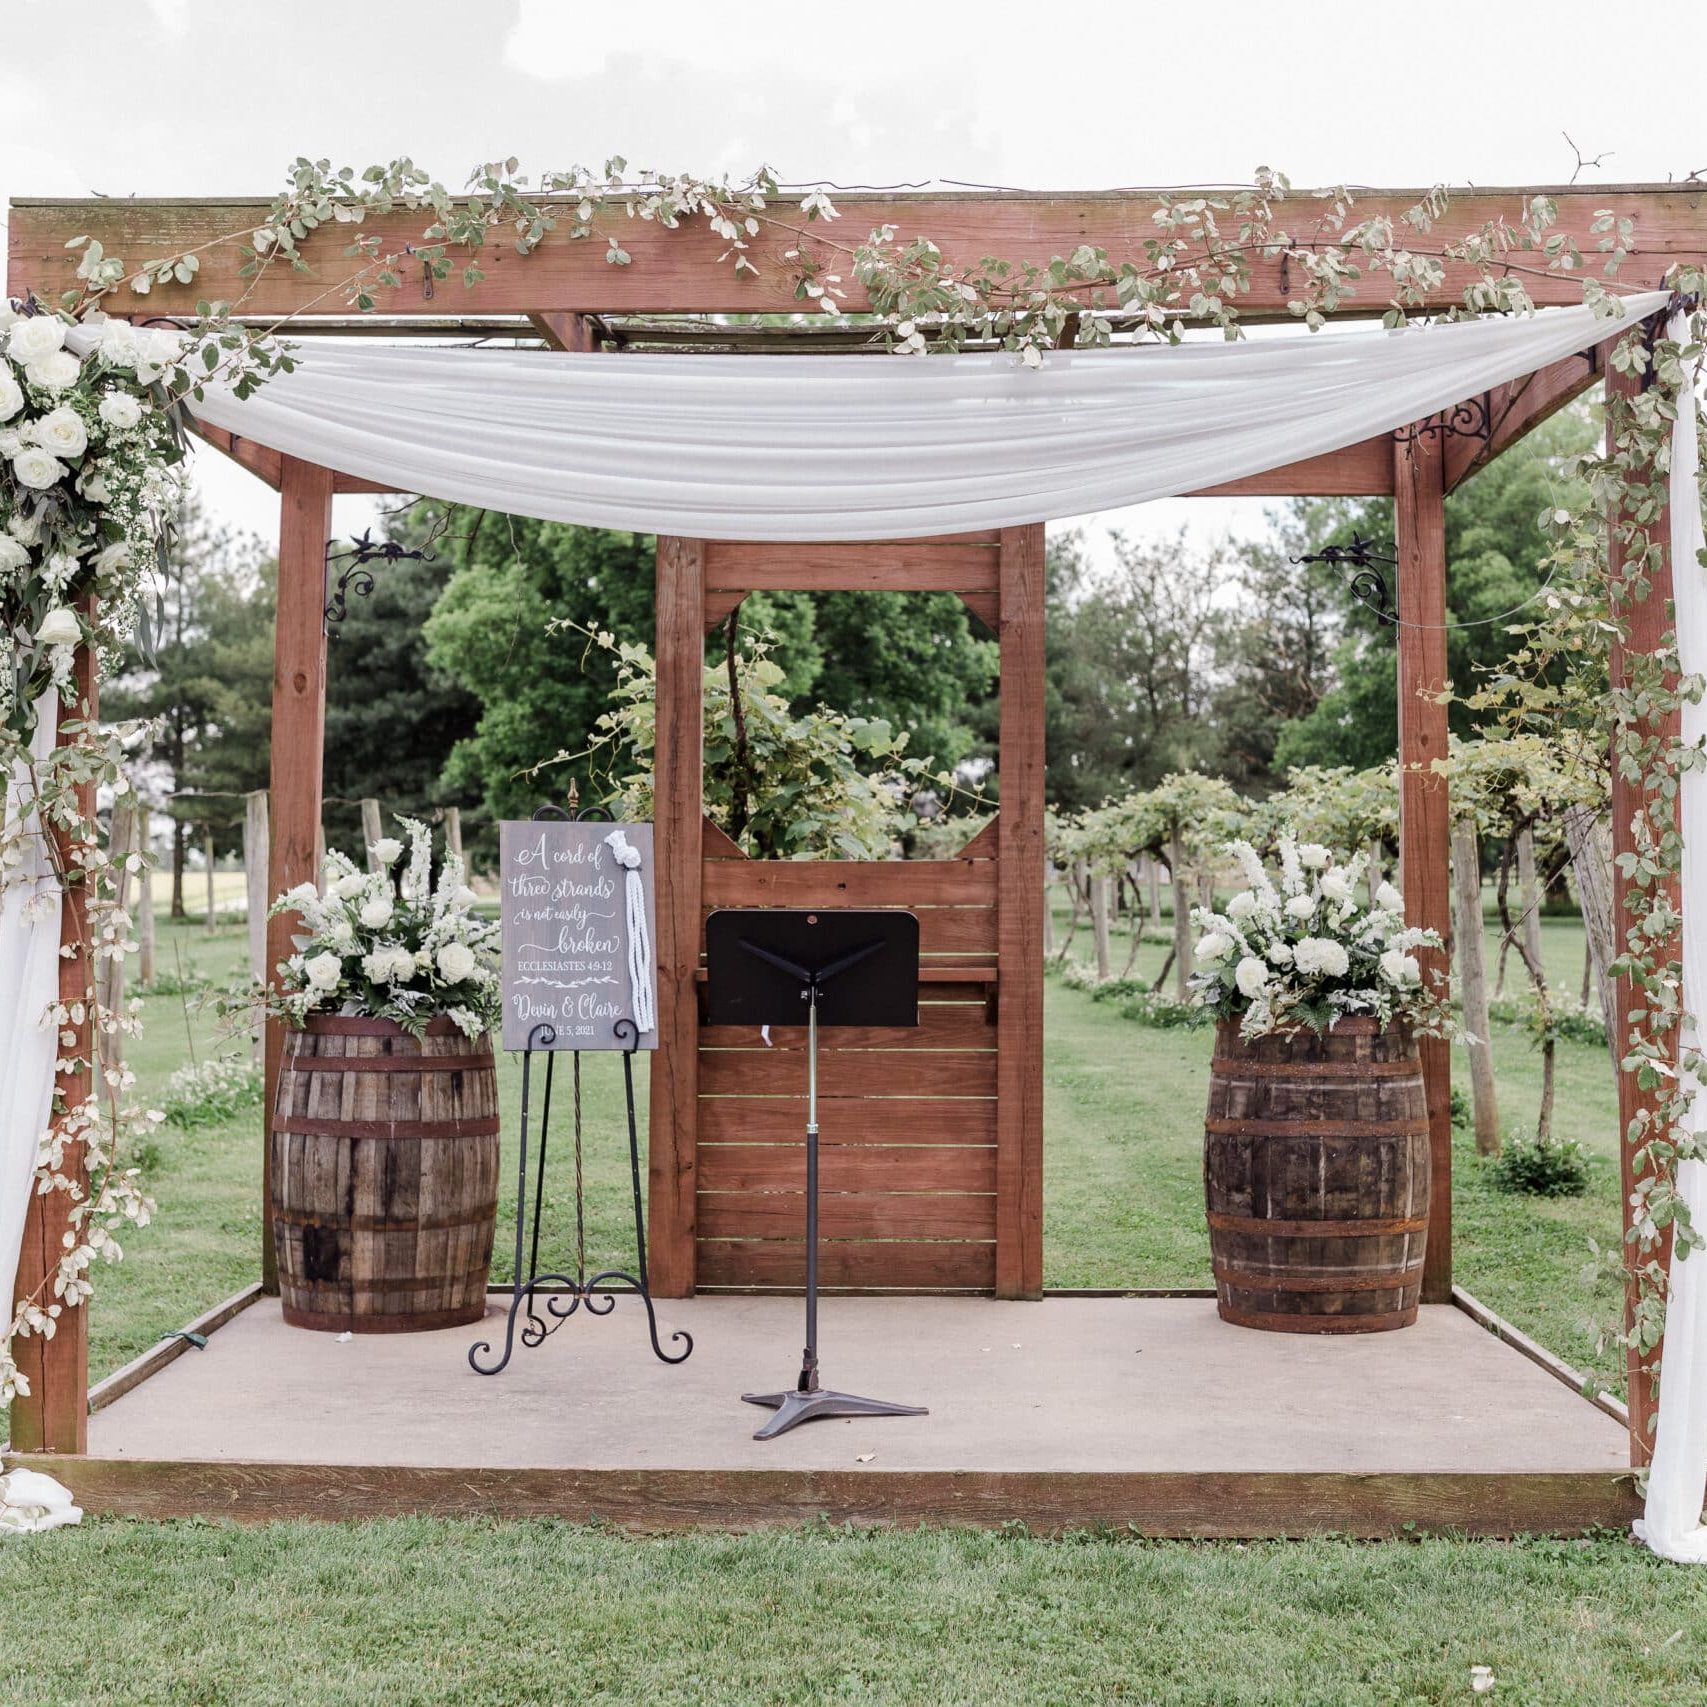 Gazebo with white floral decorations